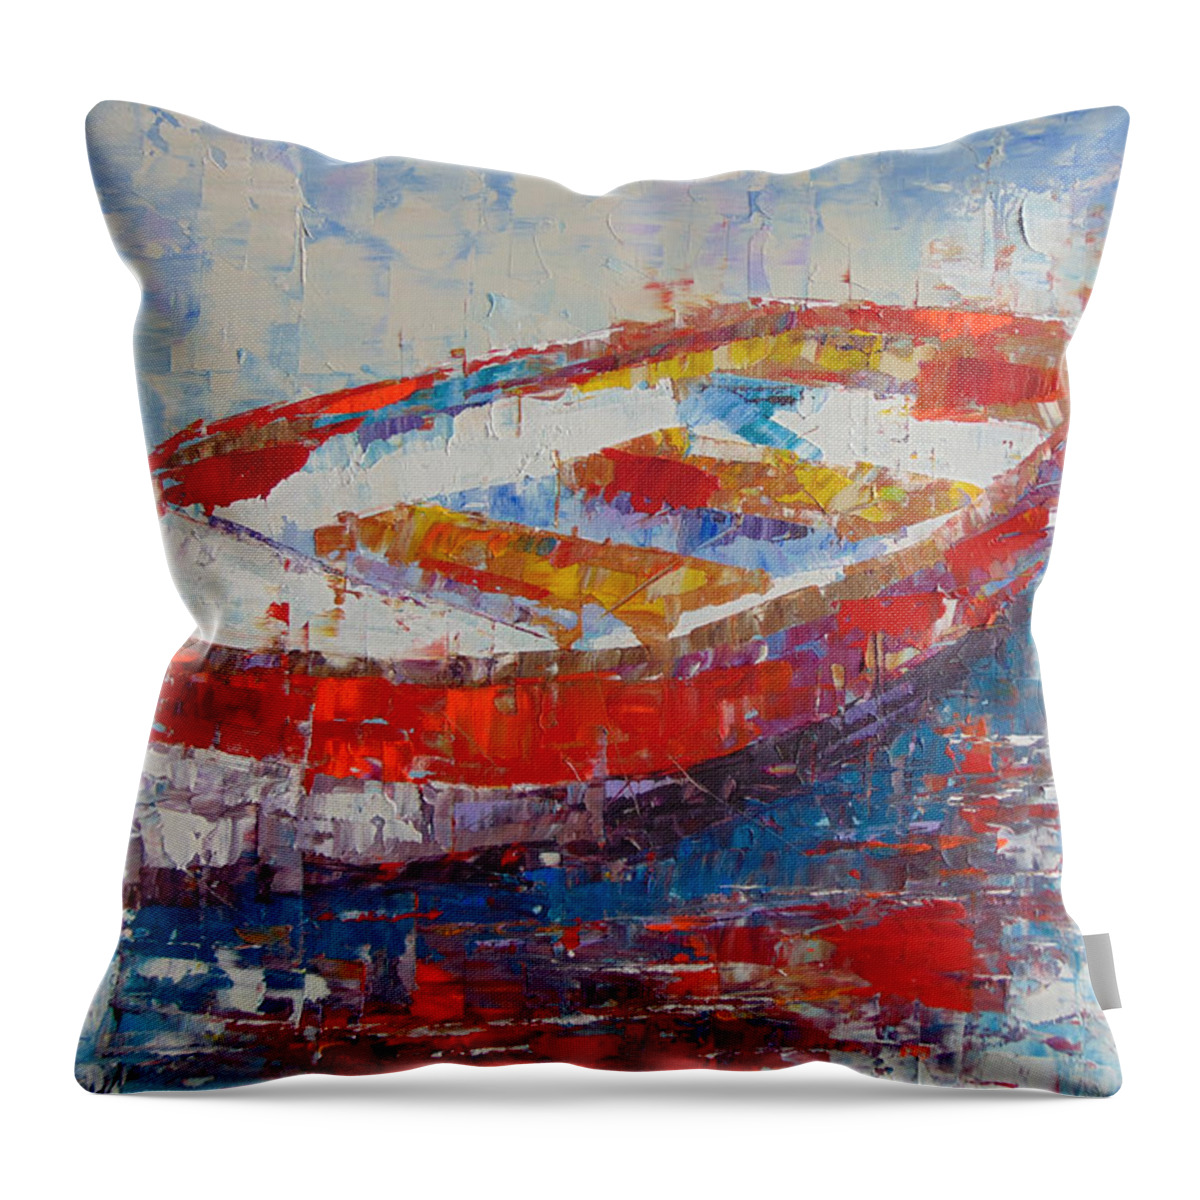 Impressionist Throw Pillow featuring the painting Barque by Frederic Payet